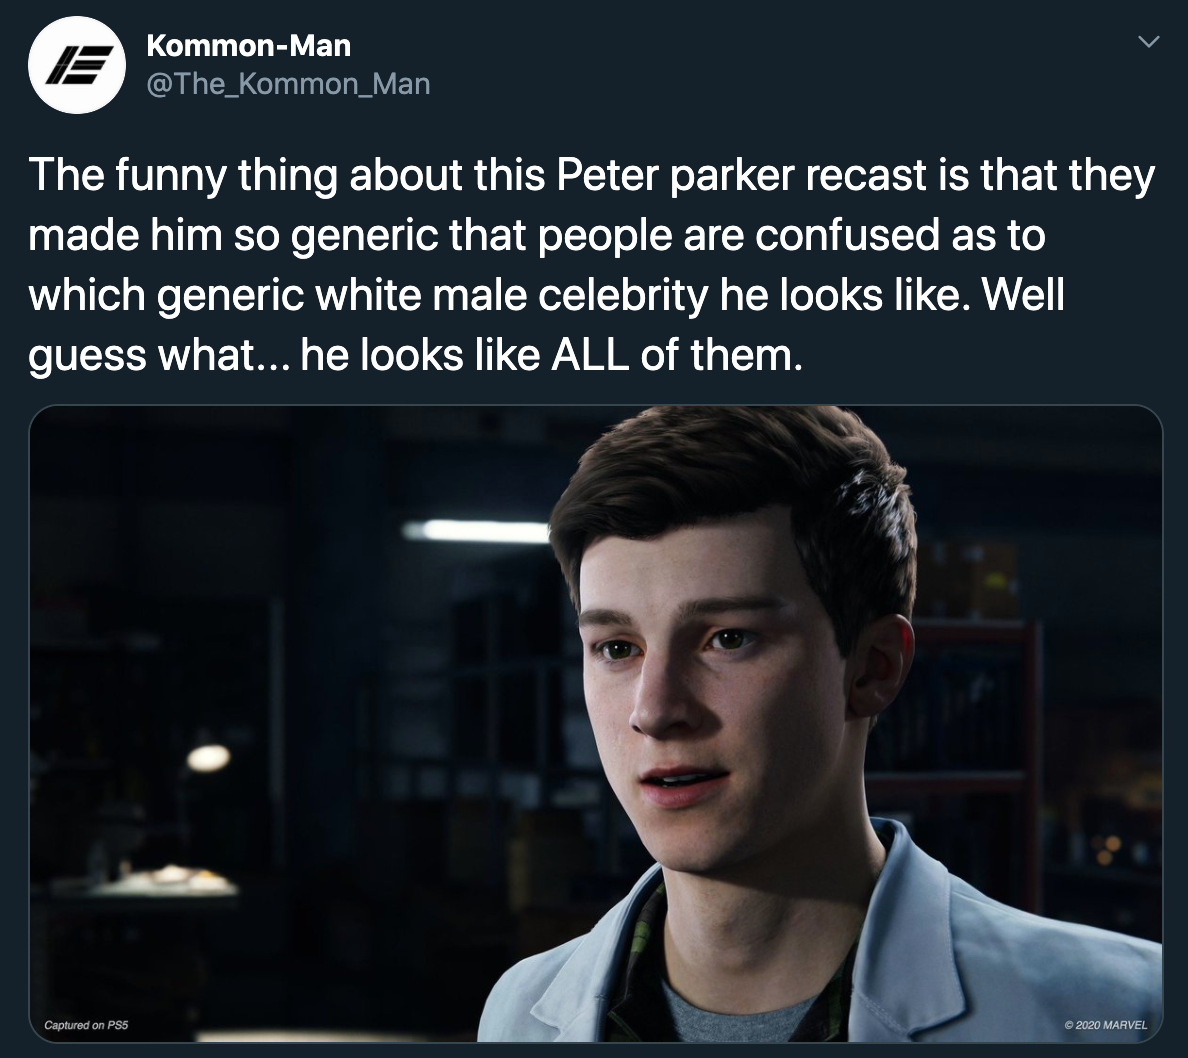 The funny thing about this Peter parker recast is that they made him so generic that people are confused as to which generic white male celebrity he looks like. Well guess what... he looks like All of them.